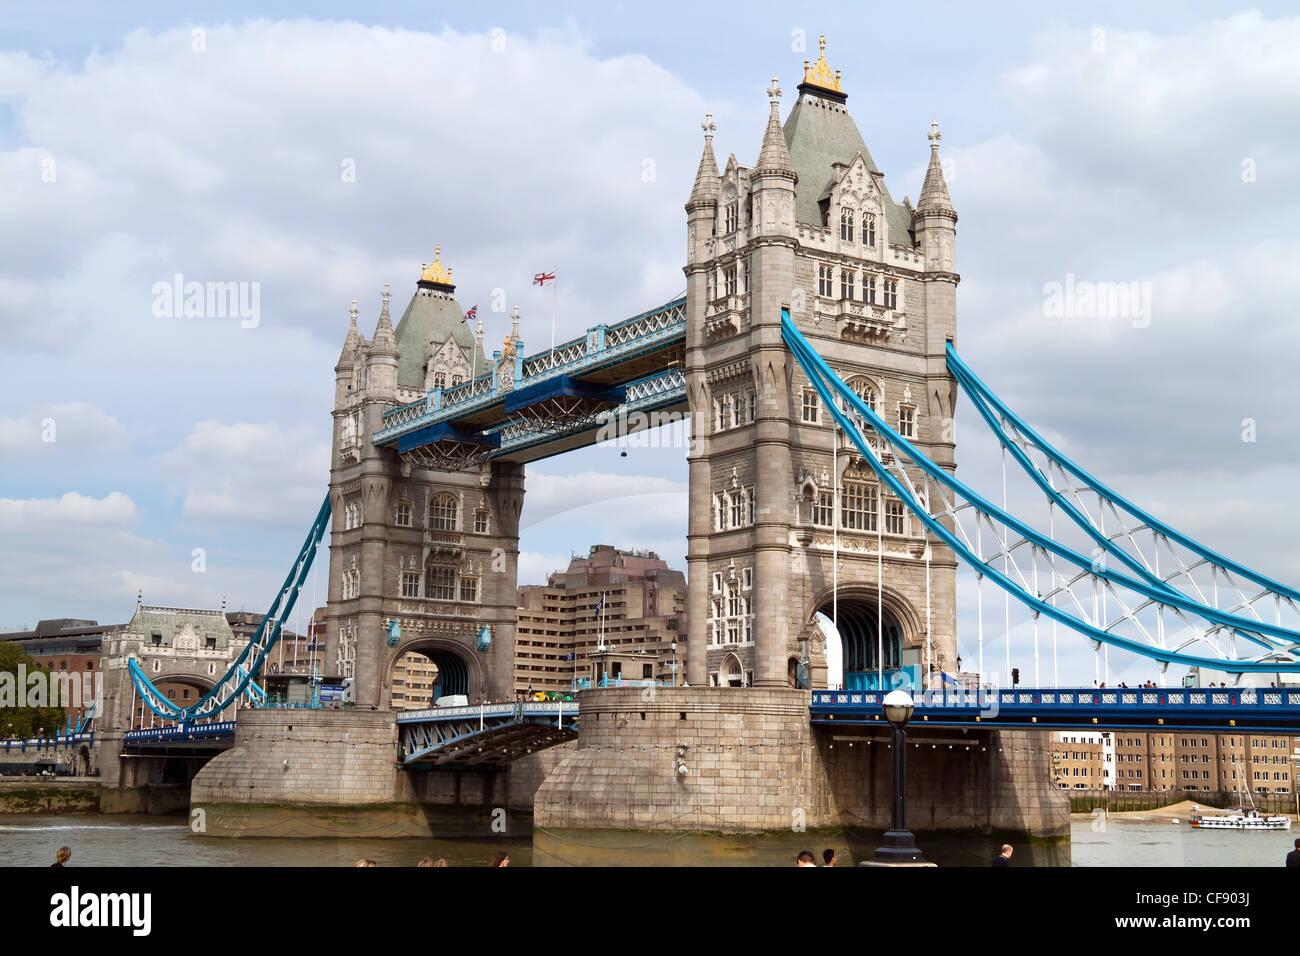 the famous tower bridge in london, england. Stock Photo